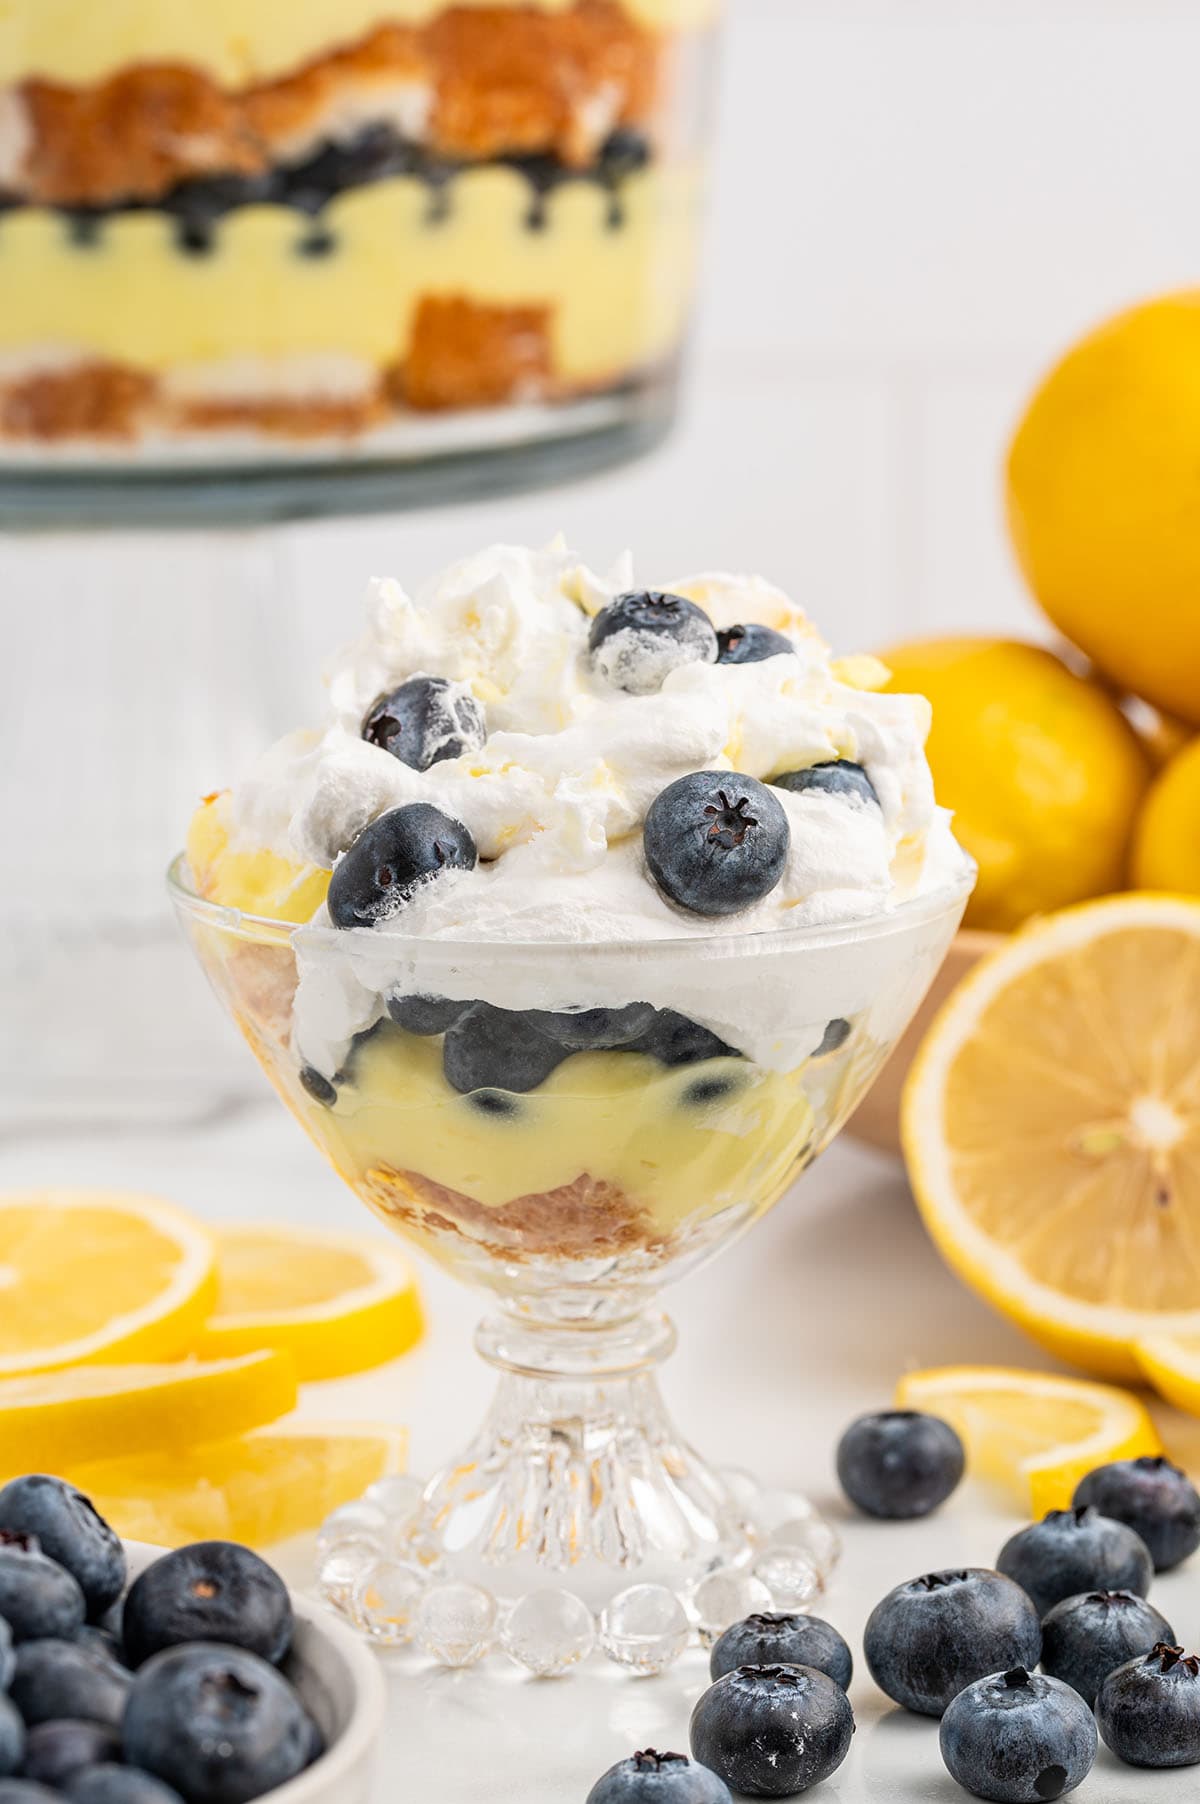 Lemon Blueberry Trifle in served using a dessert glass.